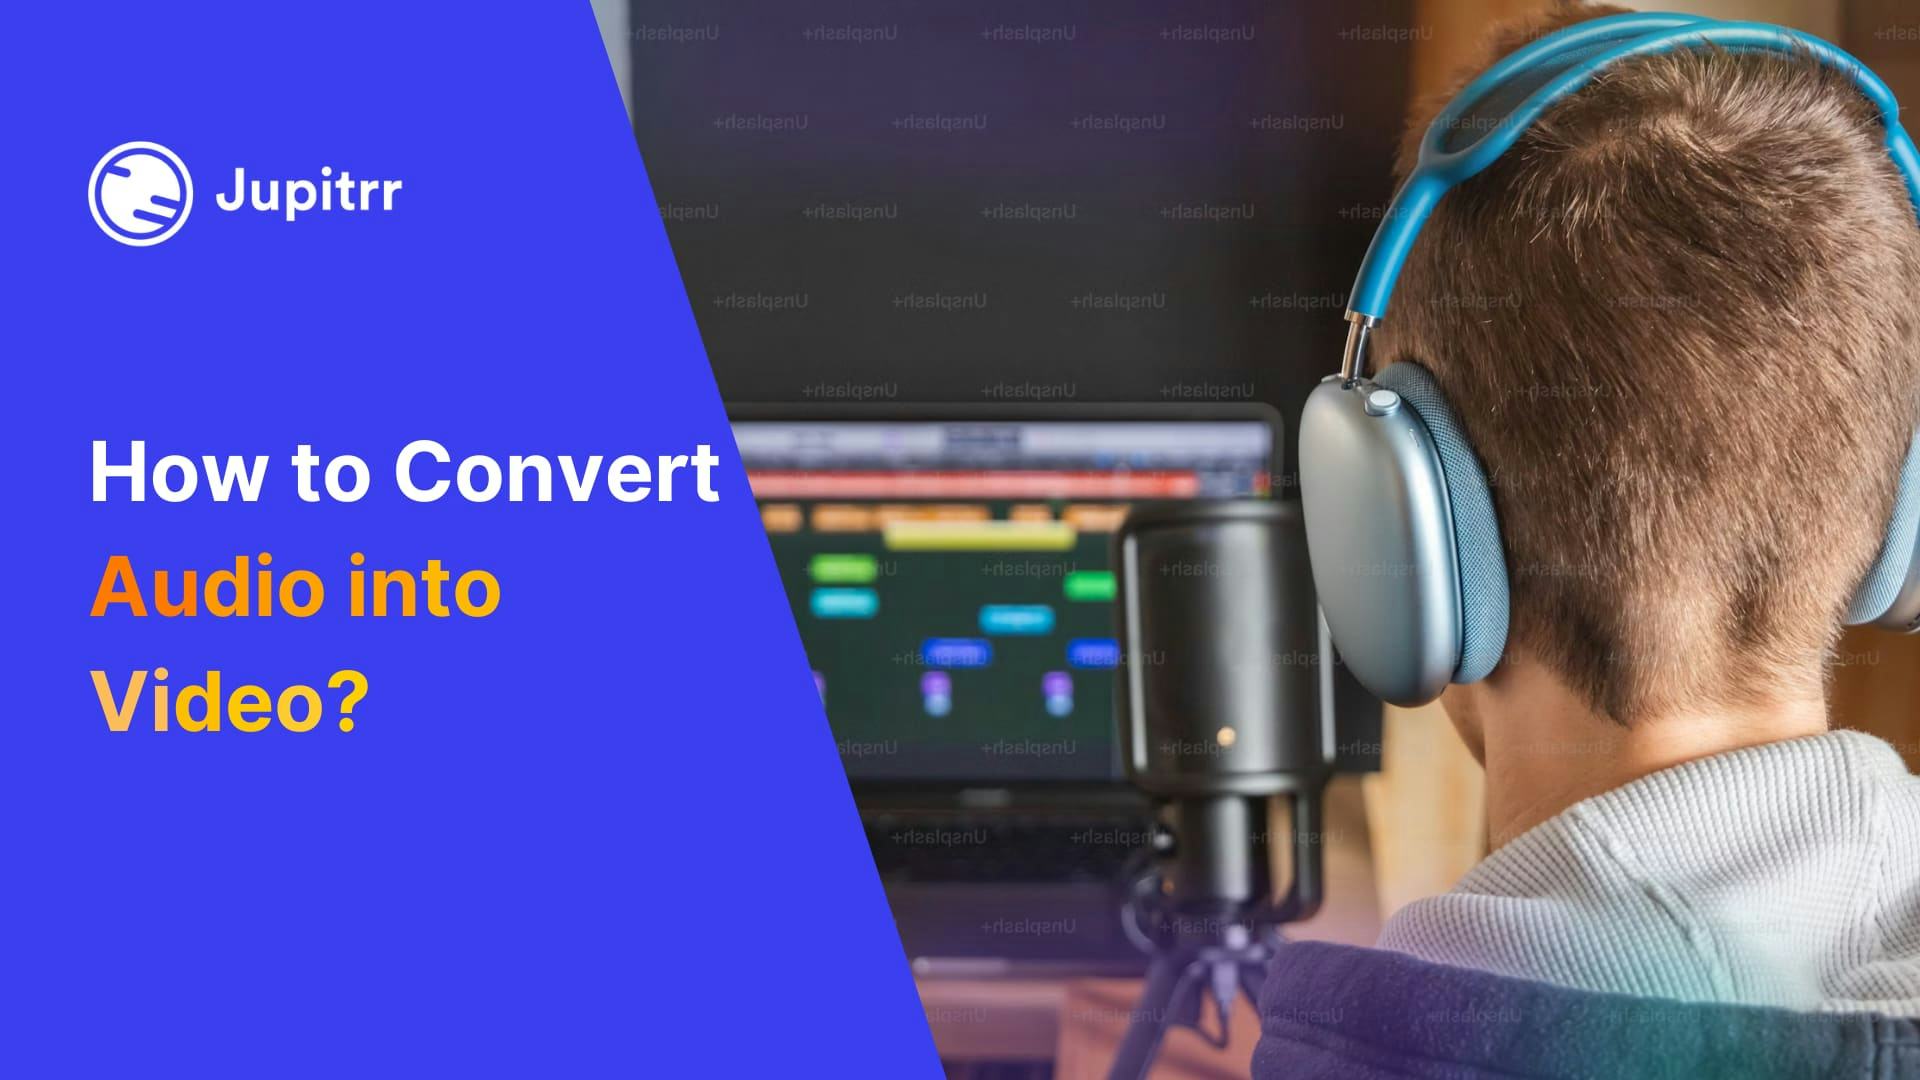 How to Convert Audio into Video?